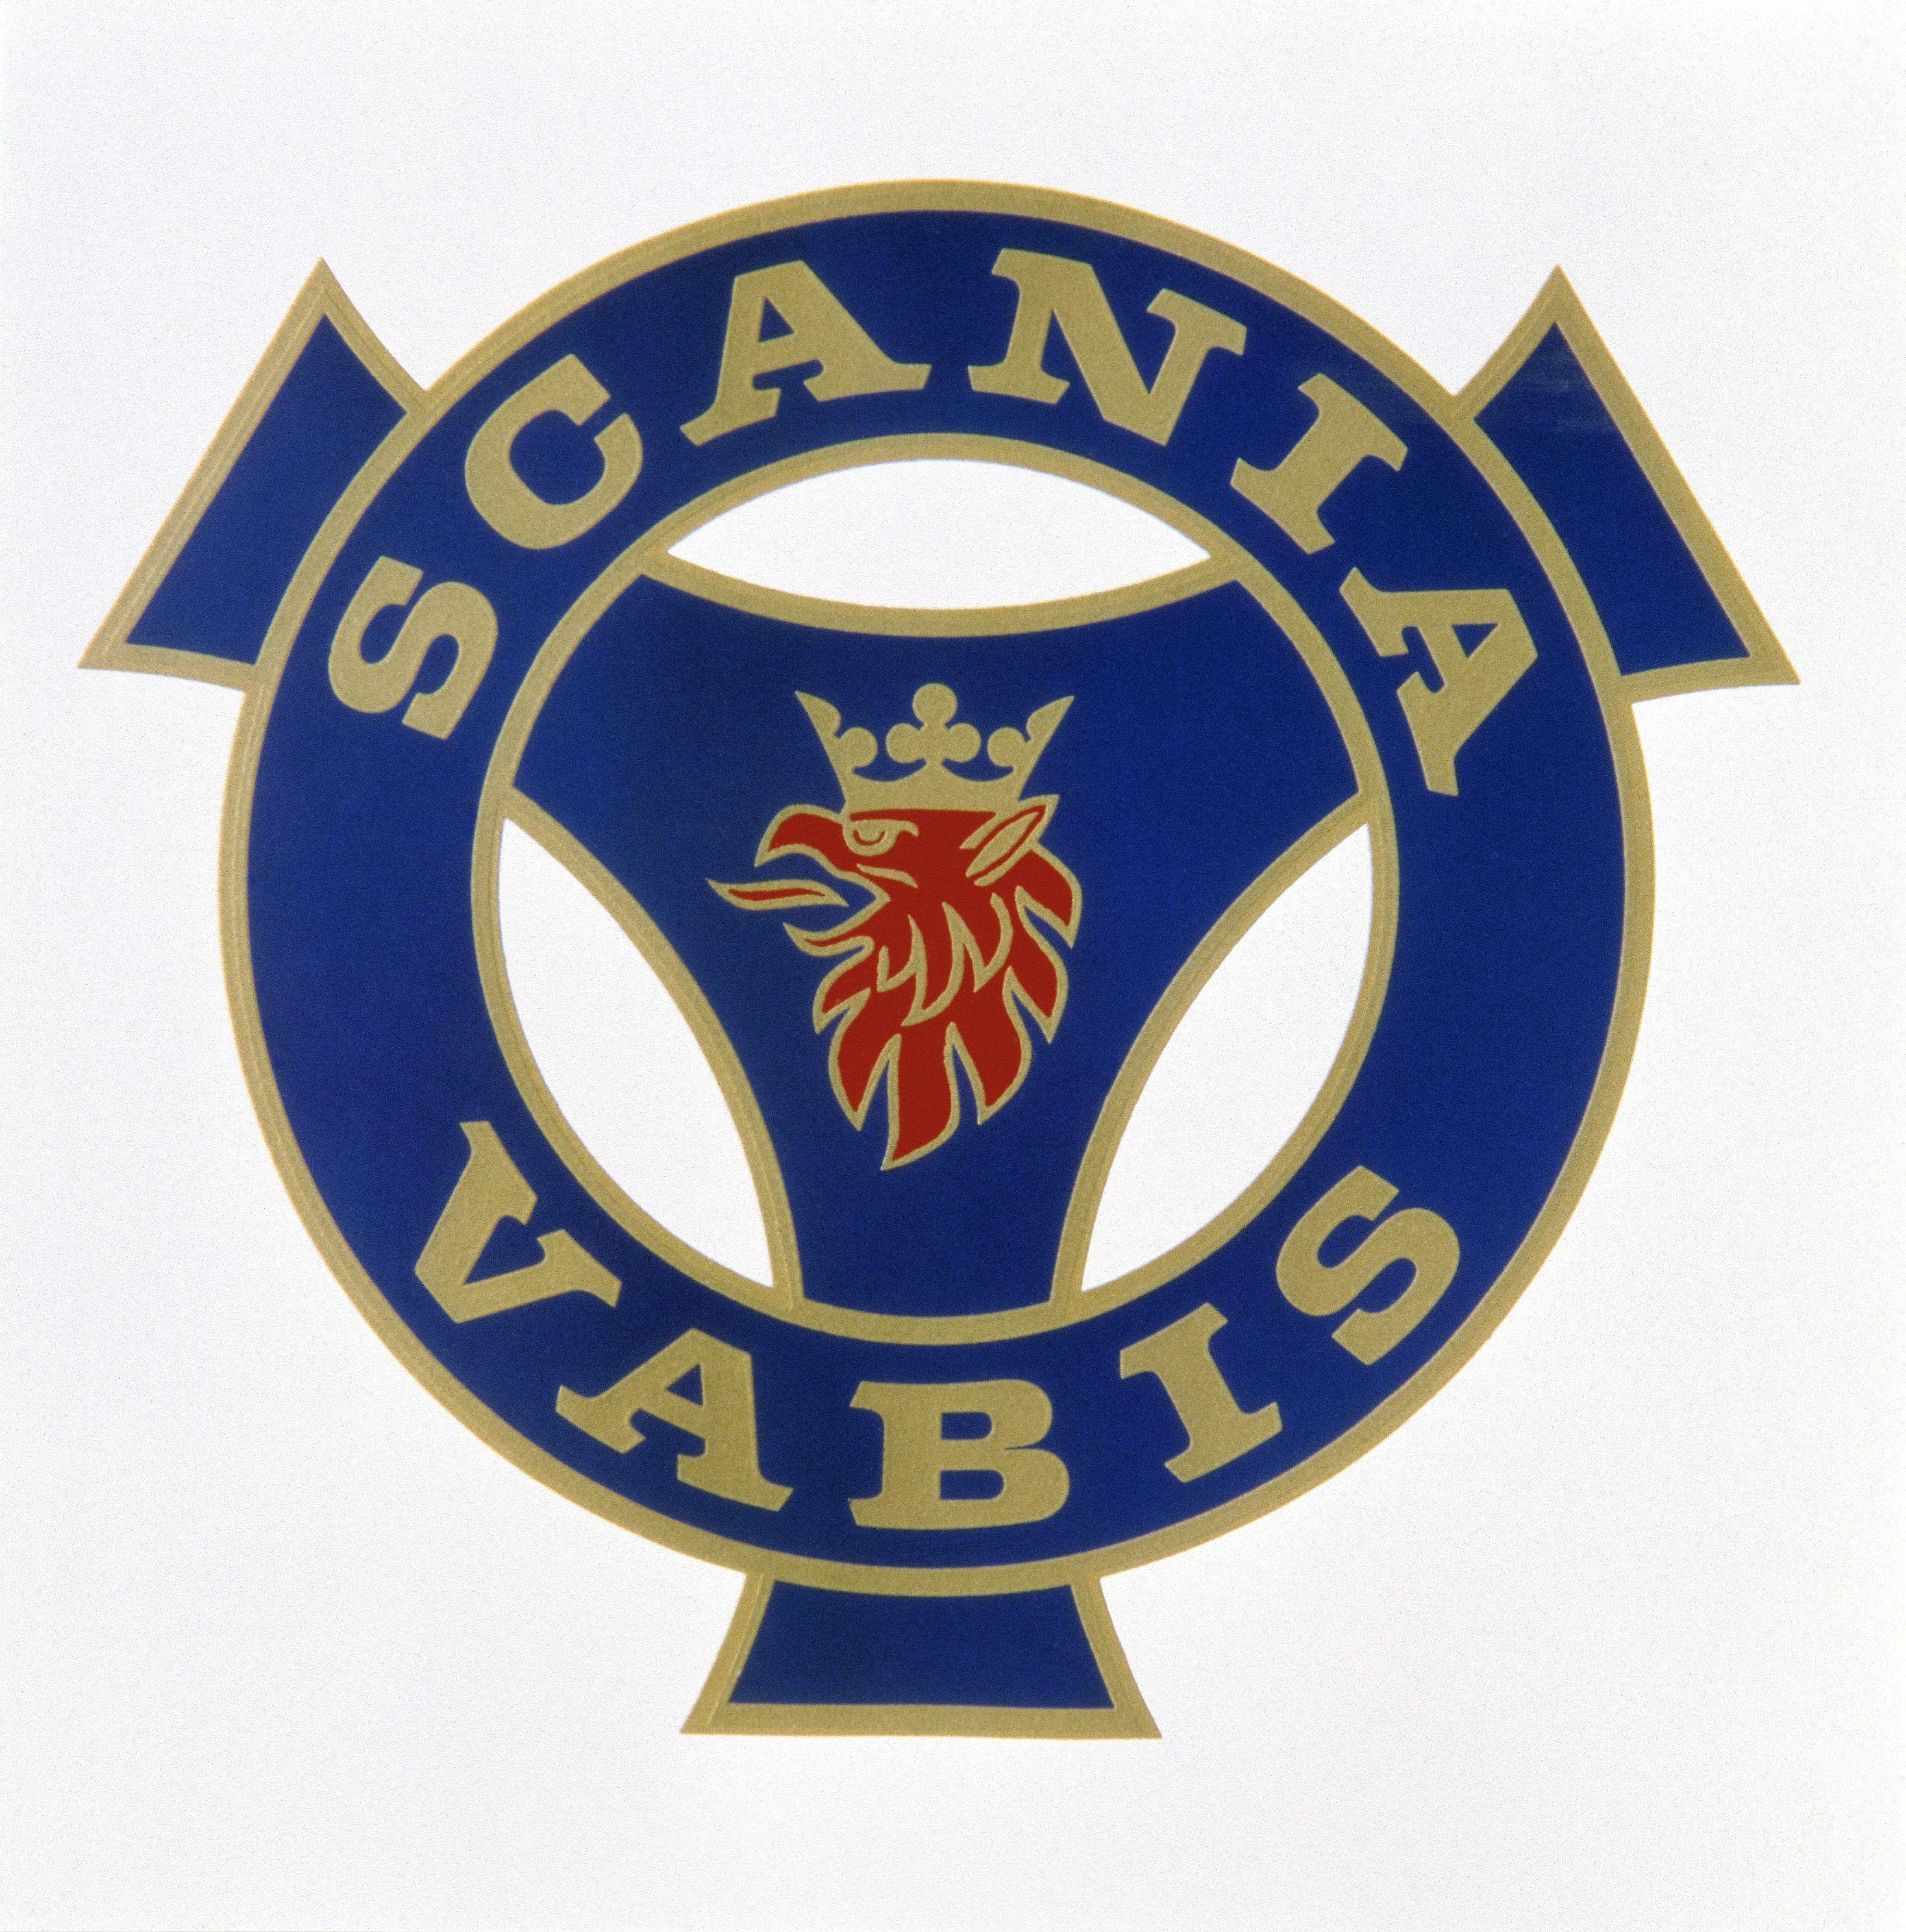 Scania Logo - Scania watches over its trademark | Scania Group